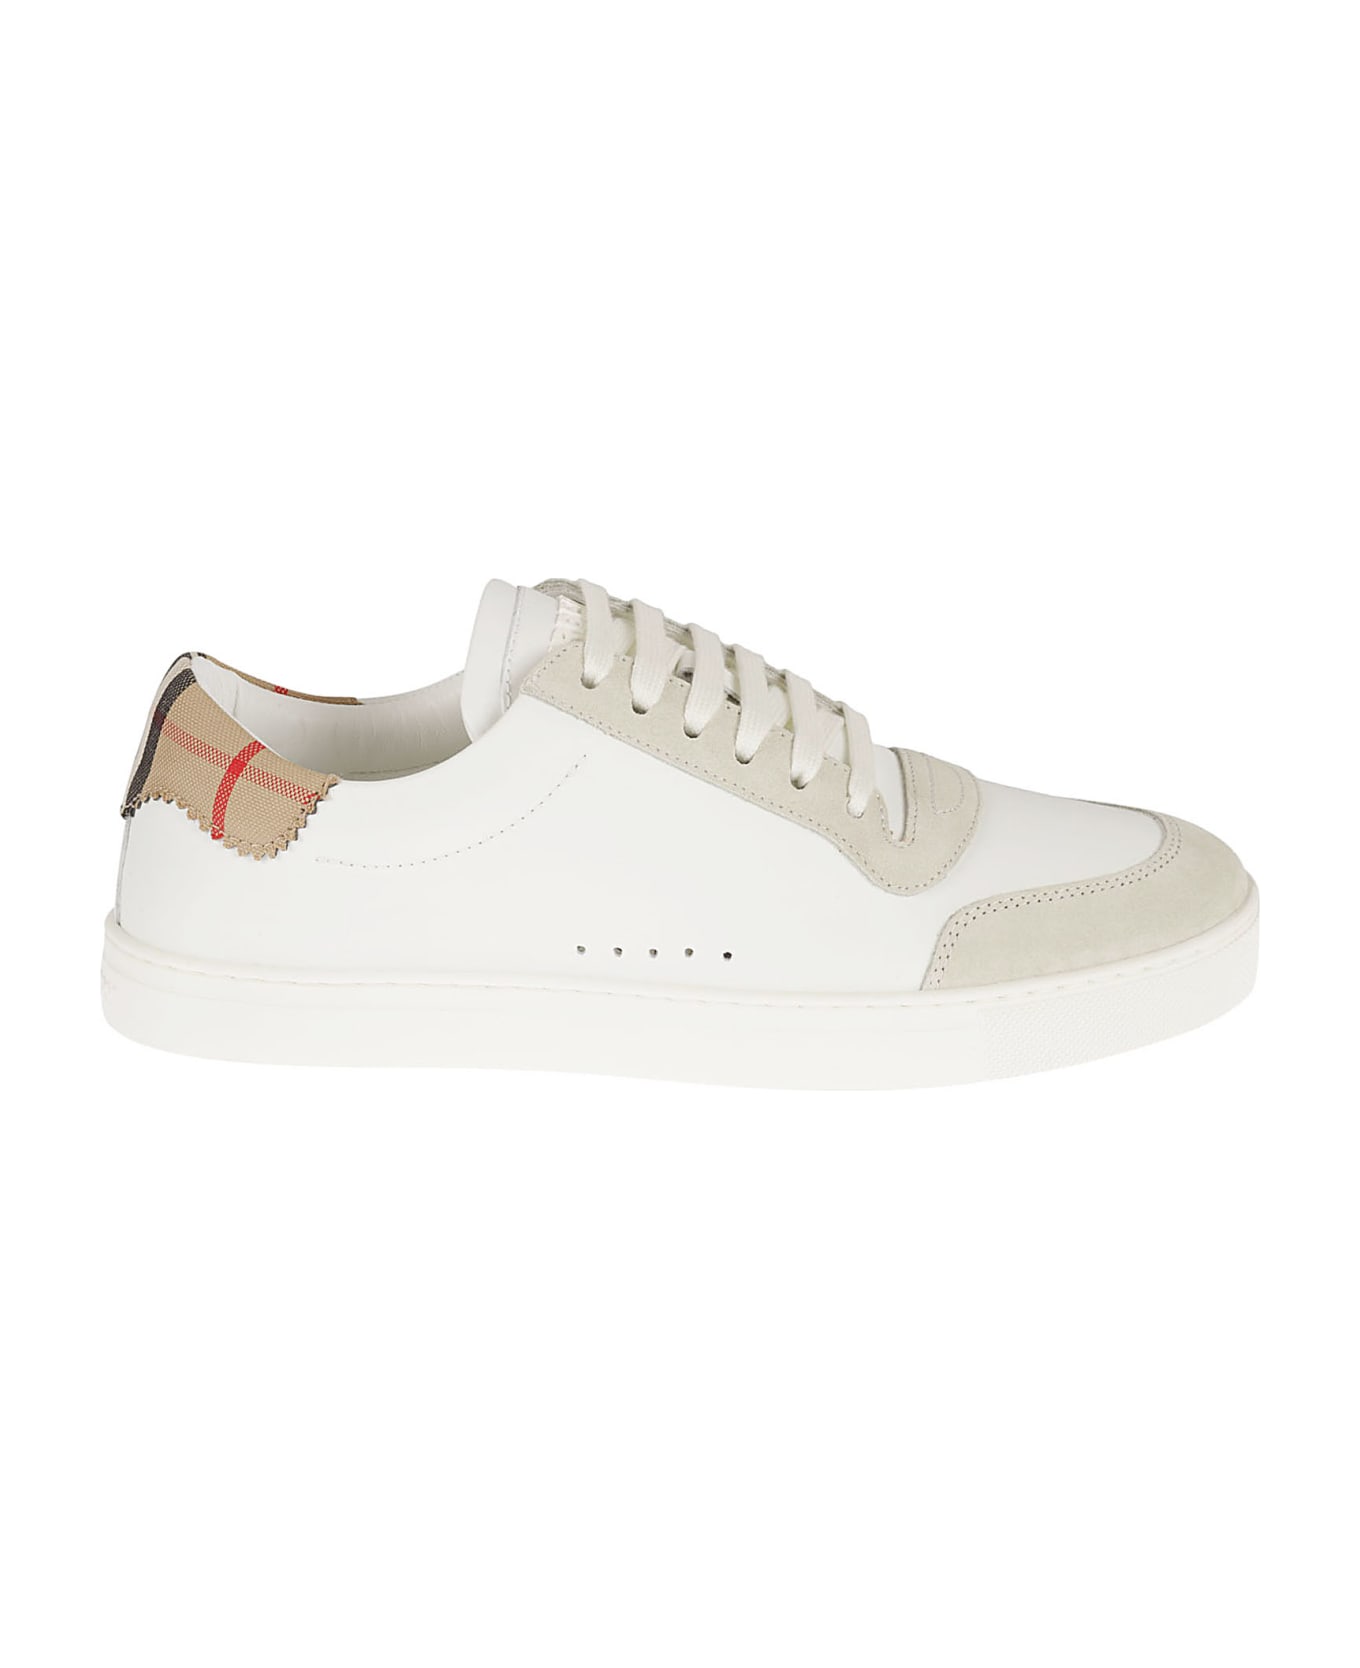 Burberry Robin Sneakers - Neutral White